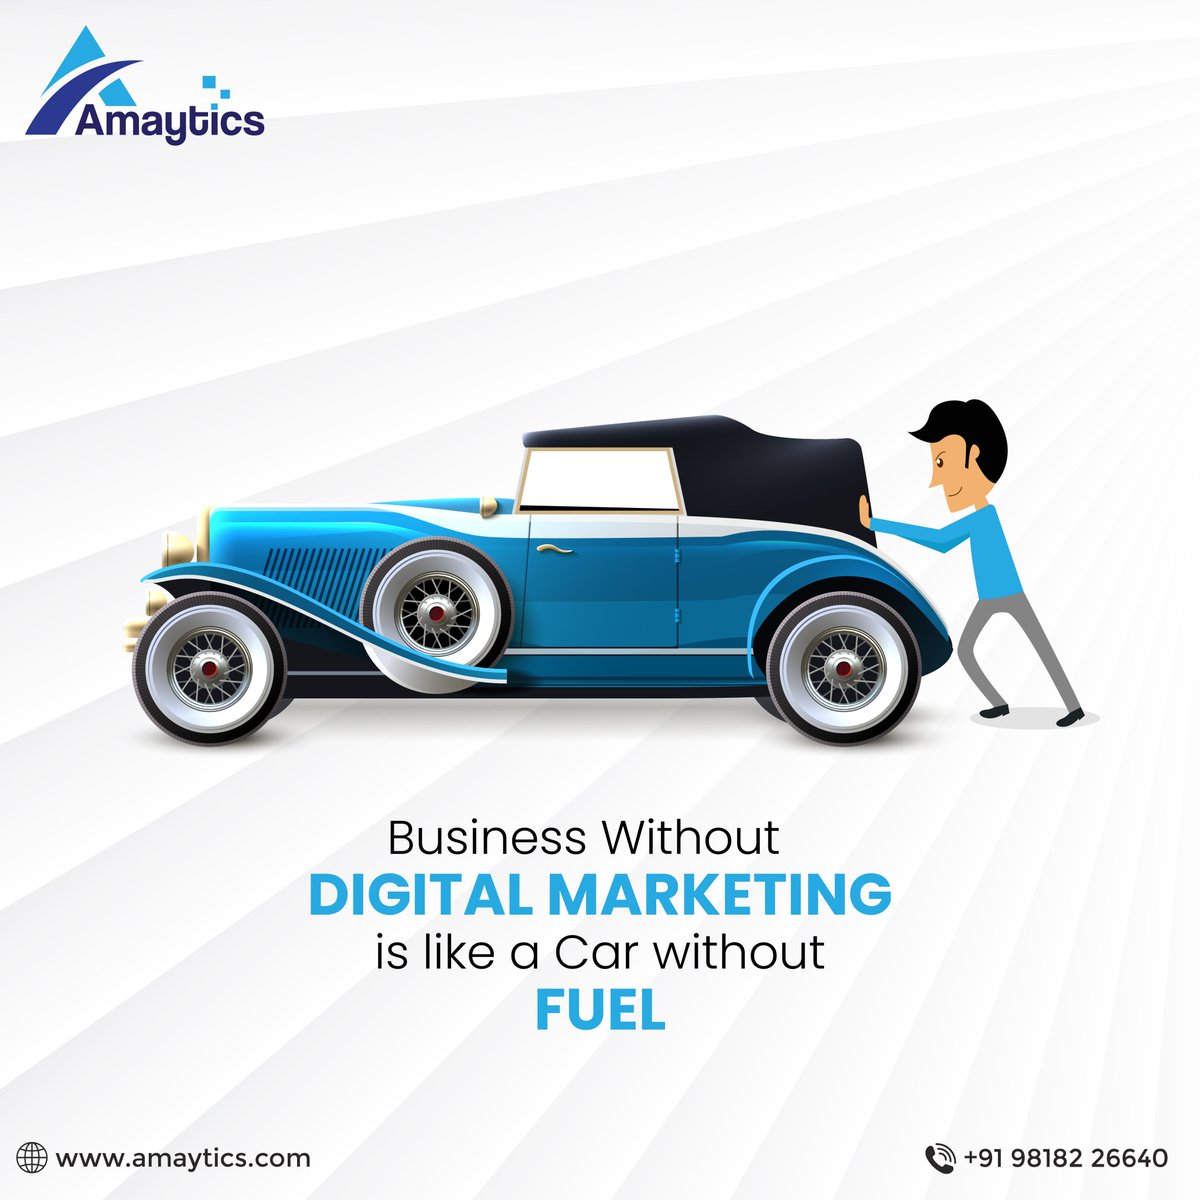 Business Without Digital Marketing is Like a Car Without Fuel.

Call Now: +91 9818226640

Visit Us: amaytics.com
.
.
.
.
#amaytics #digitalmarketing #digital #digitalcreator #DigitalBusiness #seo #seostrategy #seotips #PPC #PPCAdvertising #ppcagency #ppcmarketing